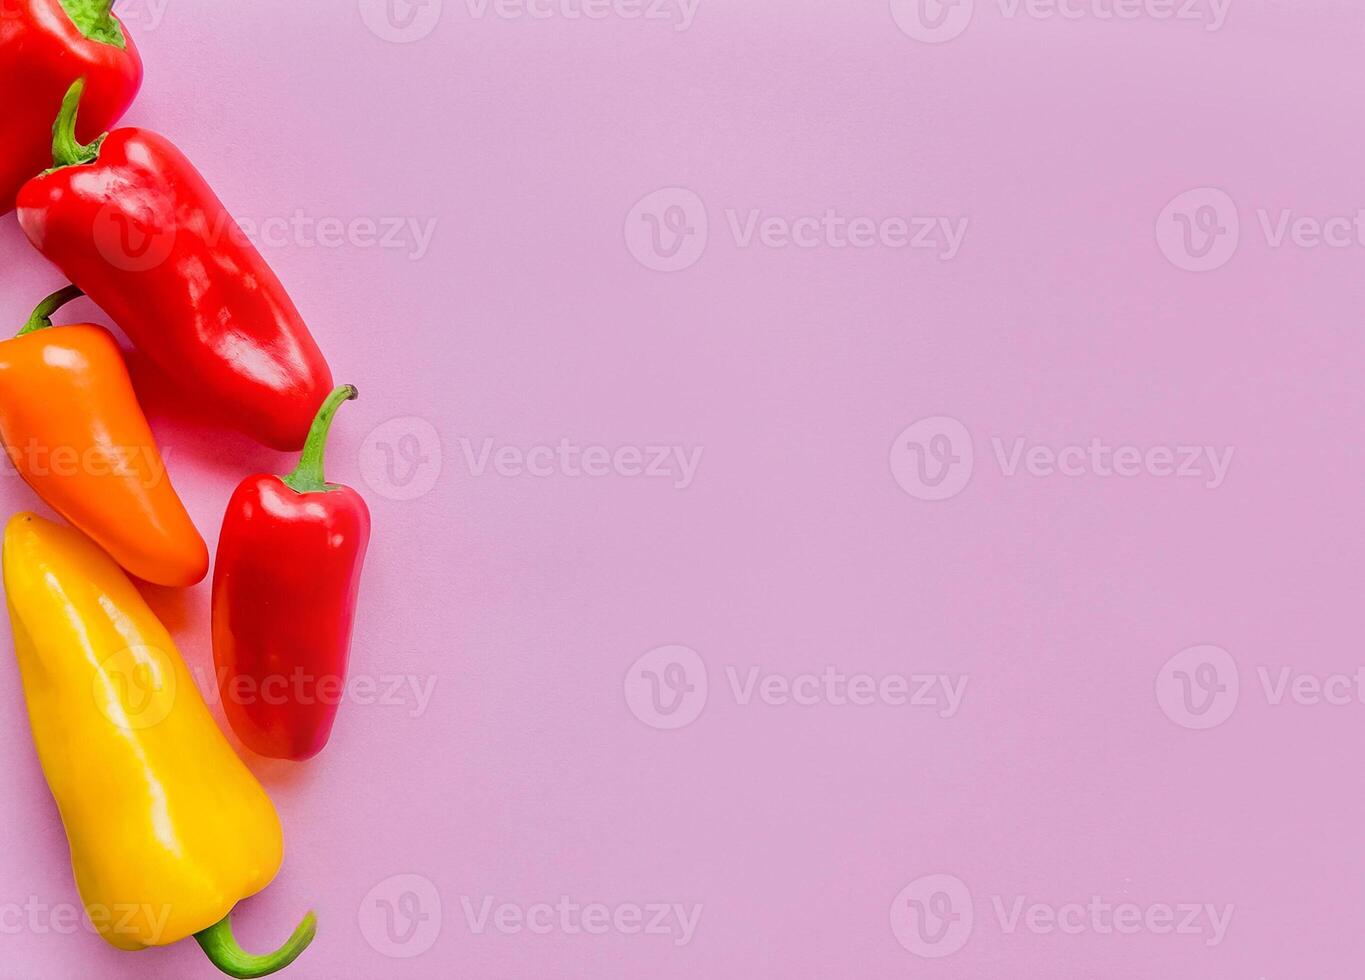 Colorful Bell Peppers on Pink Background for Healthy Food Concept photo